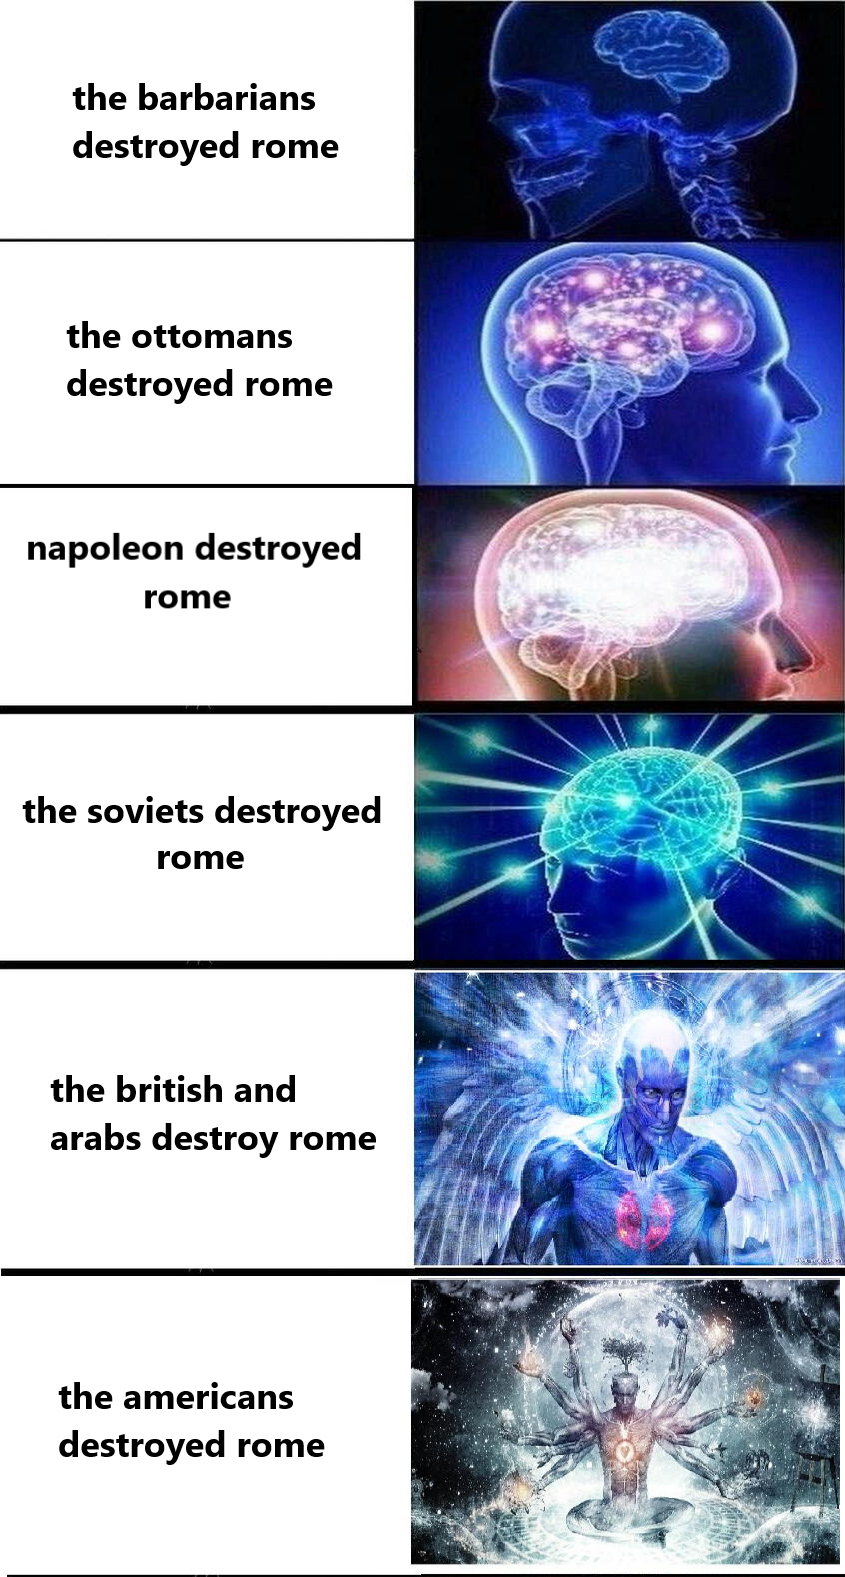 who destroyed rome?